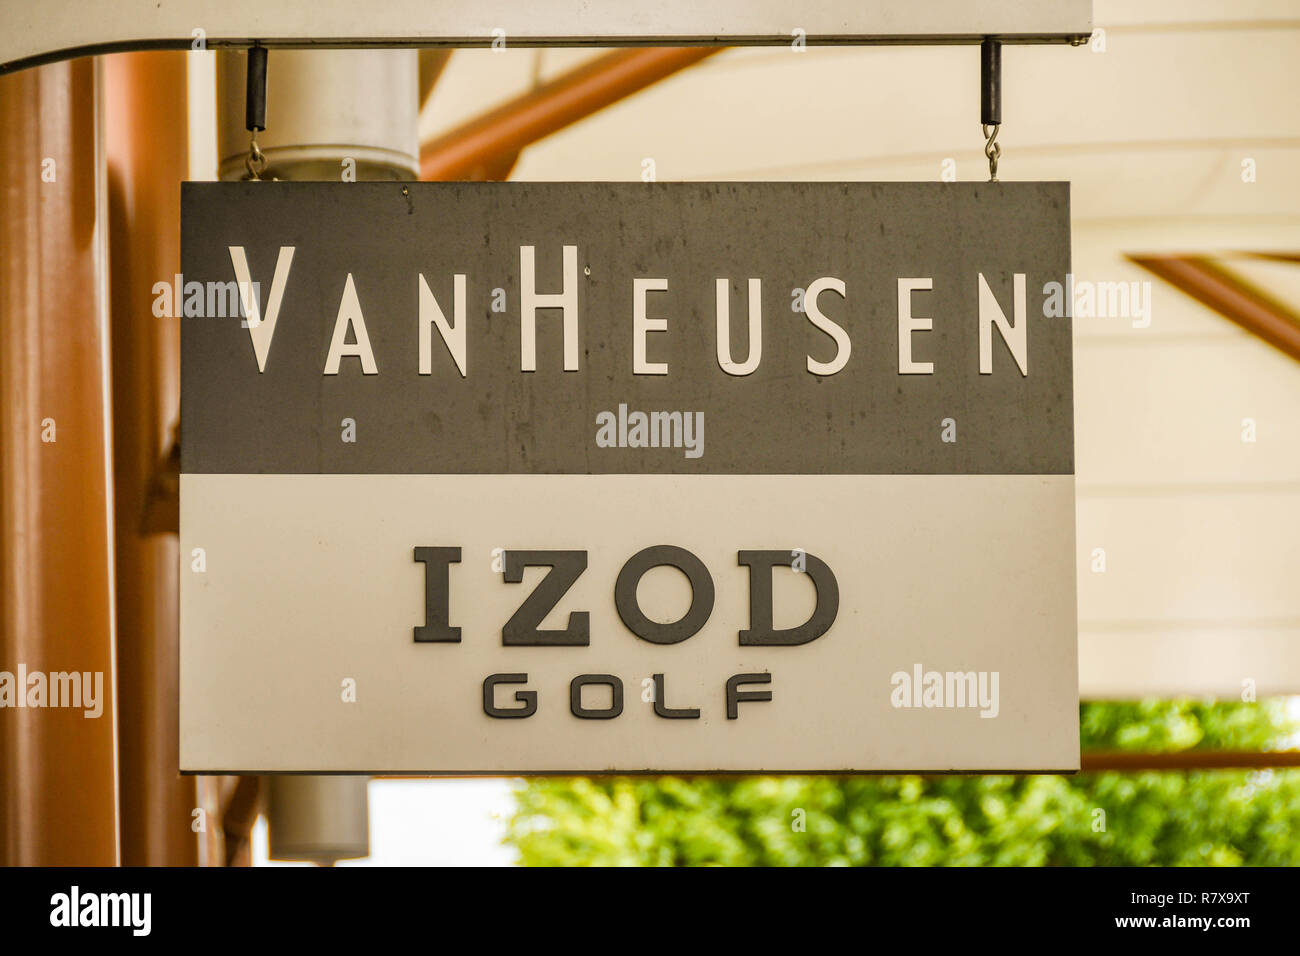 SEATTLE, WA, USA - JUNE 2018: Close up view of a sign outside the Van  Heusen and Izod Golf factory store at the Premium Outlets shopping mall in  Tulal Stock Photo - Alamy